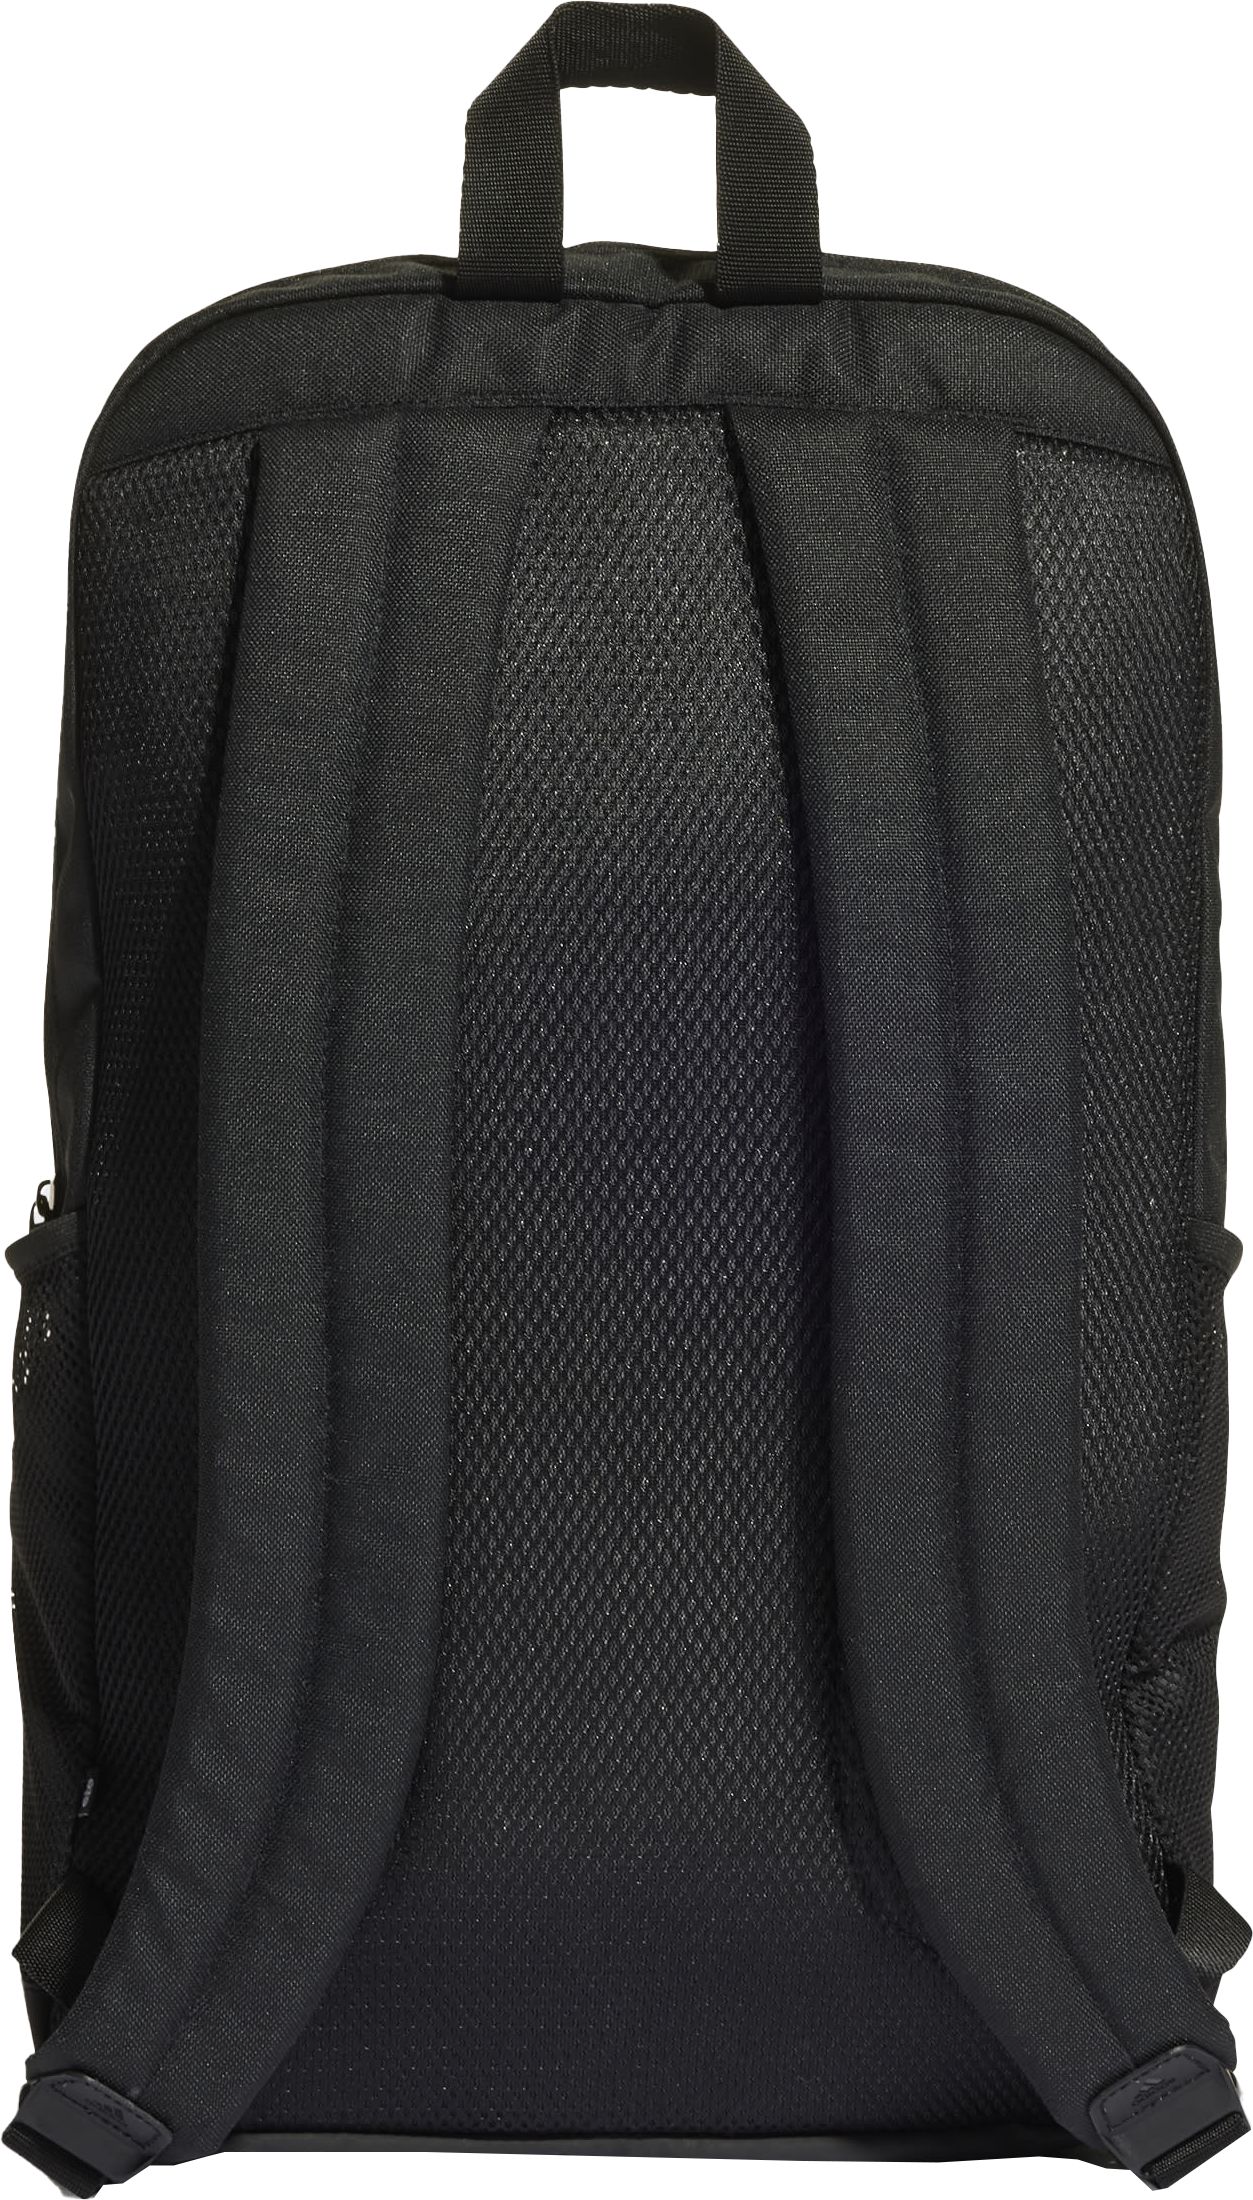 ADIDAS, Motion Linear Backpack